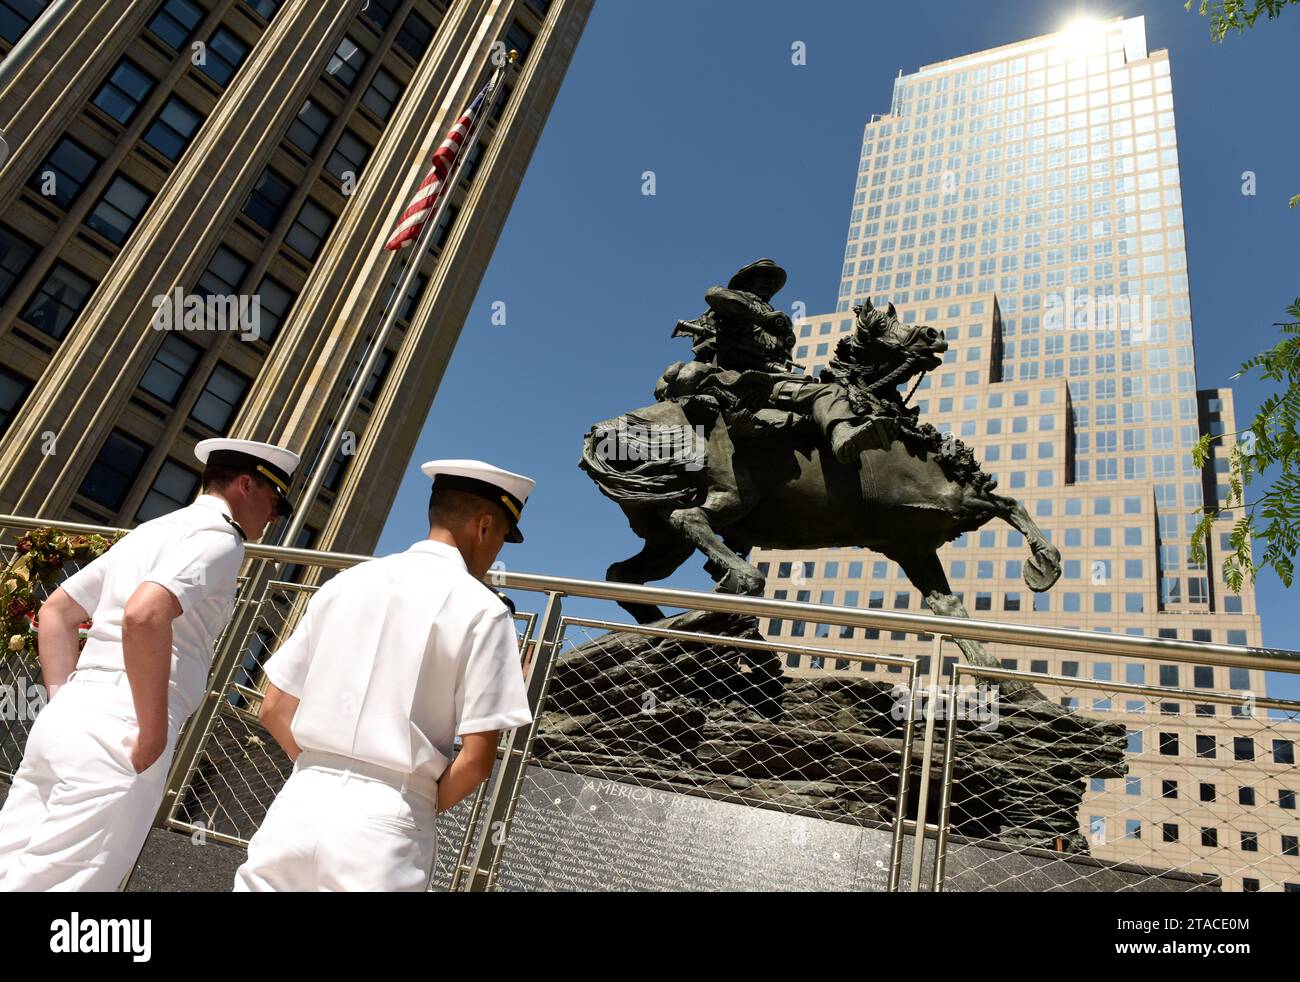 New York, USA - May 24, 2018: US Navy sailors during visiting the America's Response Monument in Liberty Park near NYC 9/11 Memorial in New York. Stock Photo